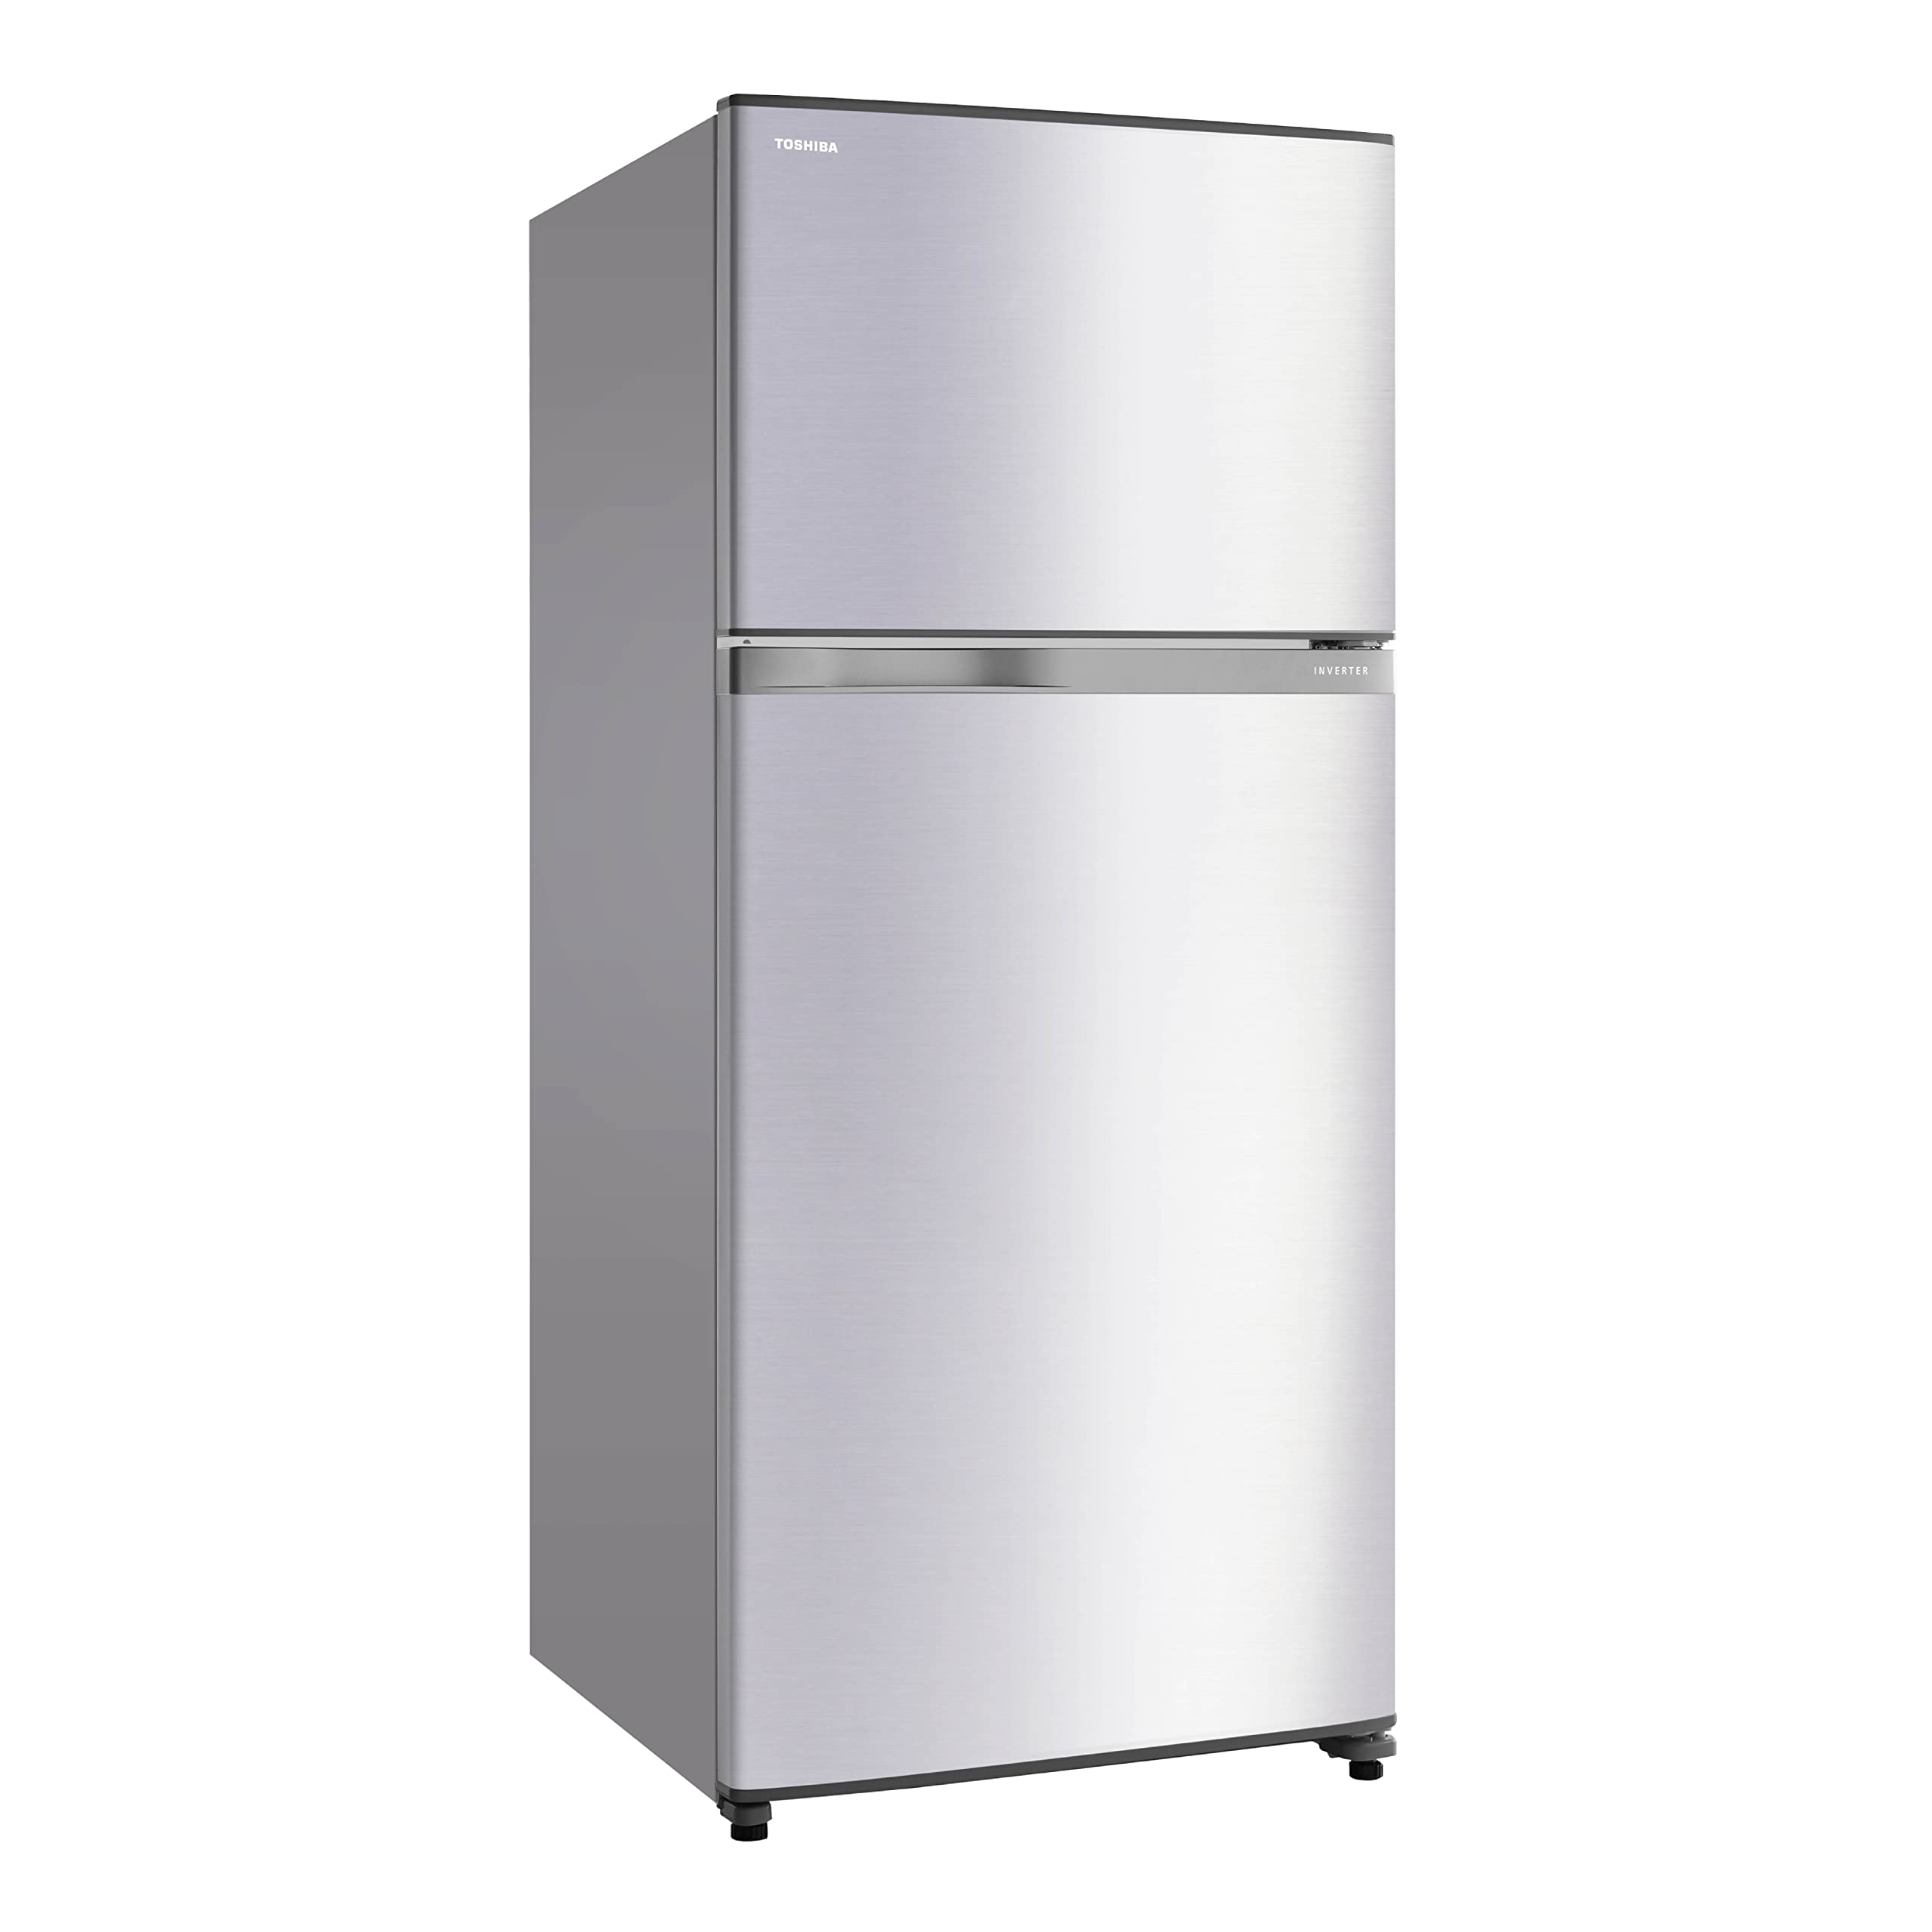 Toshiba GRA820U-X(S) 2-door refrigerator in stylish silver finish. Features spacious shelves, crisper drawers, and efficient cooling technology.